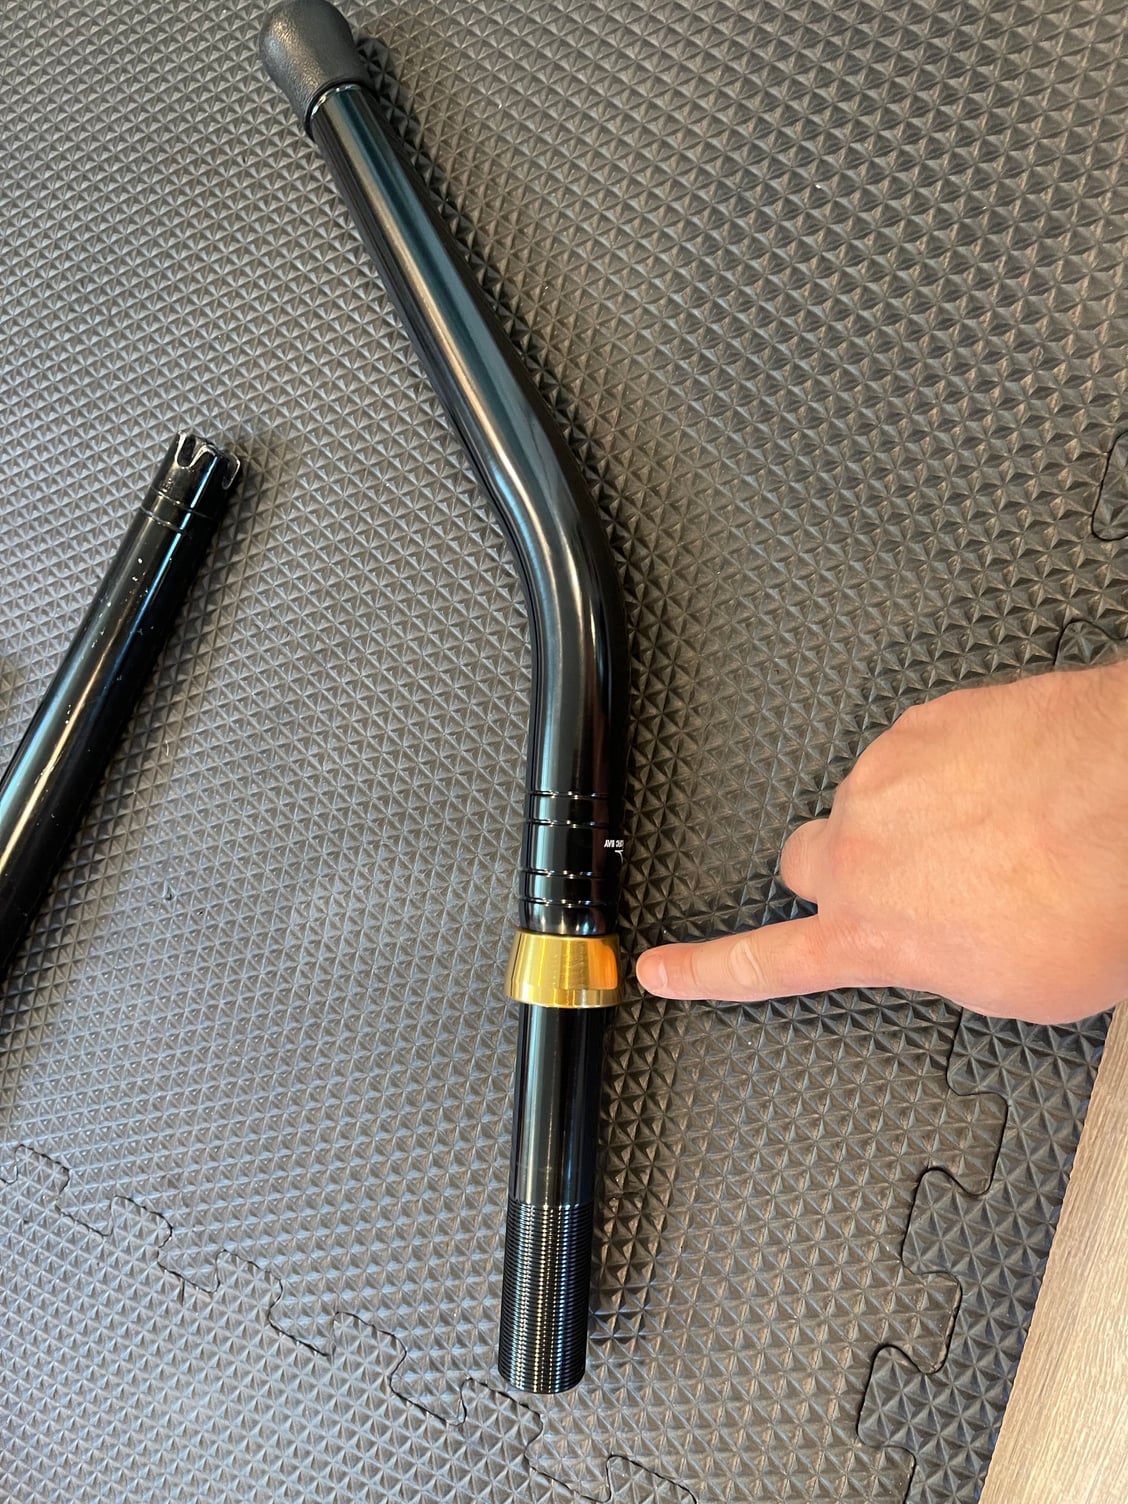 How to remove reel seat from aluminum rod butt? - The Hull Truth - Boating  and Fishing Forum